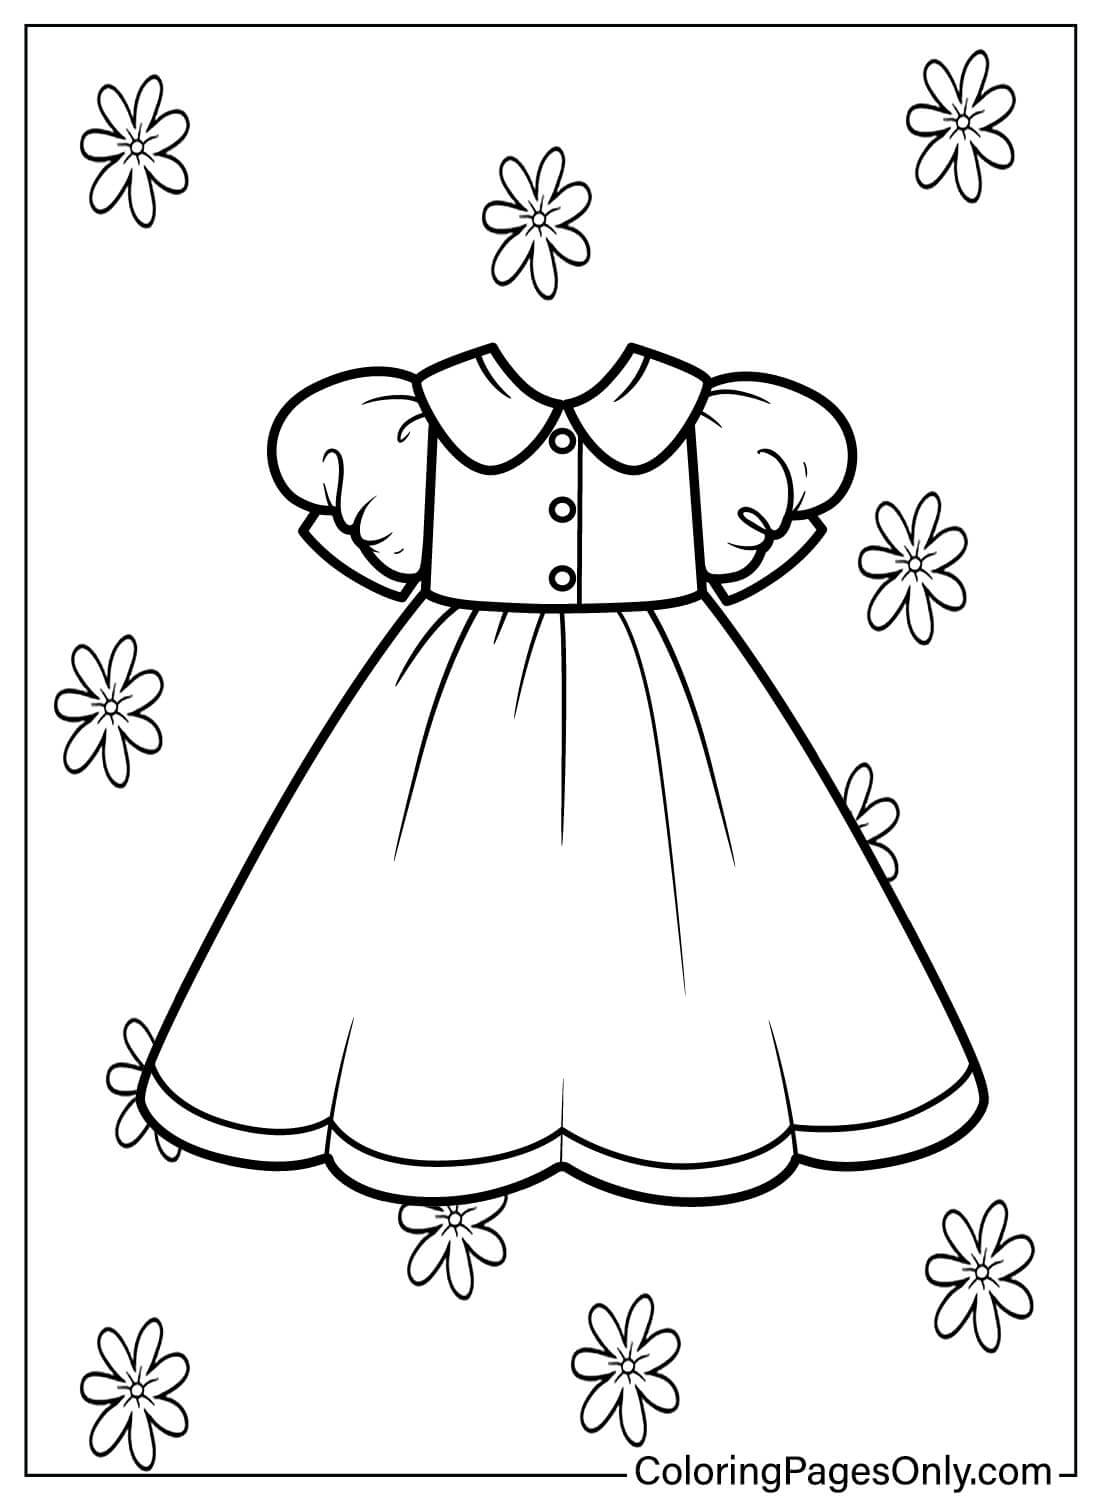 Coloring Sheet Baby Dress from Baby Dress